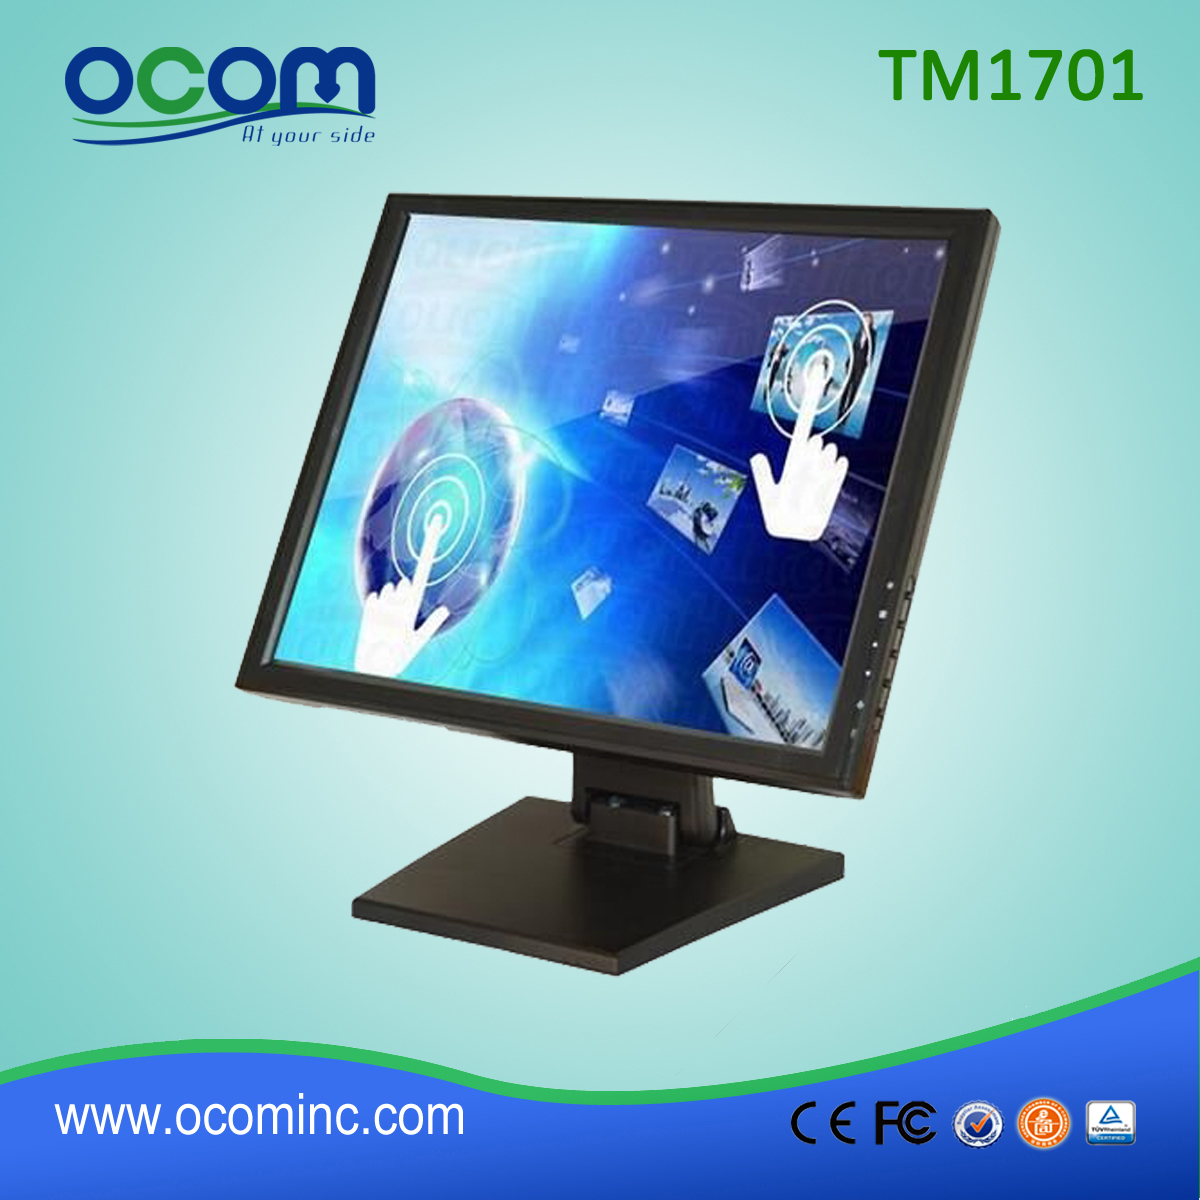 TM1701 LCD 17 pollici Touch Screen POS Monitor